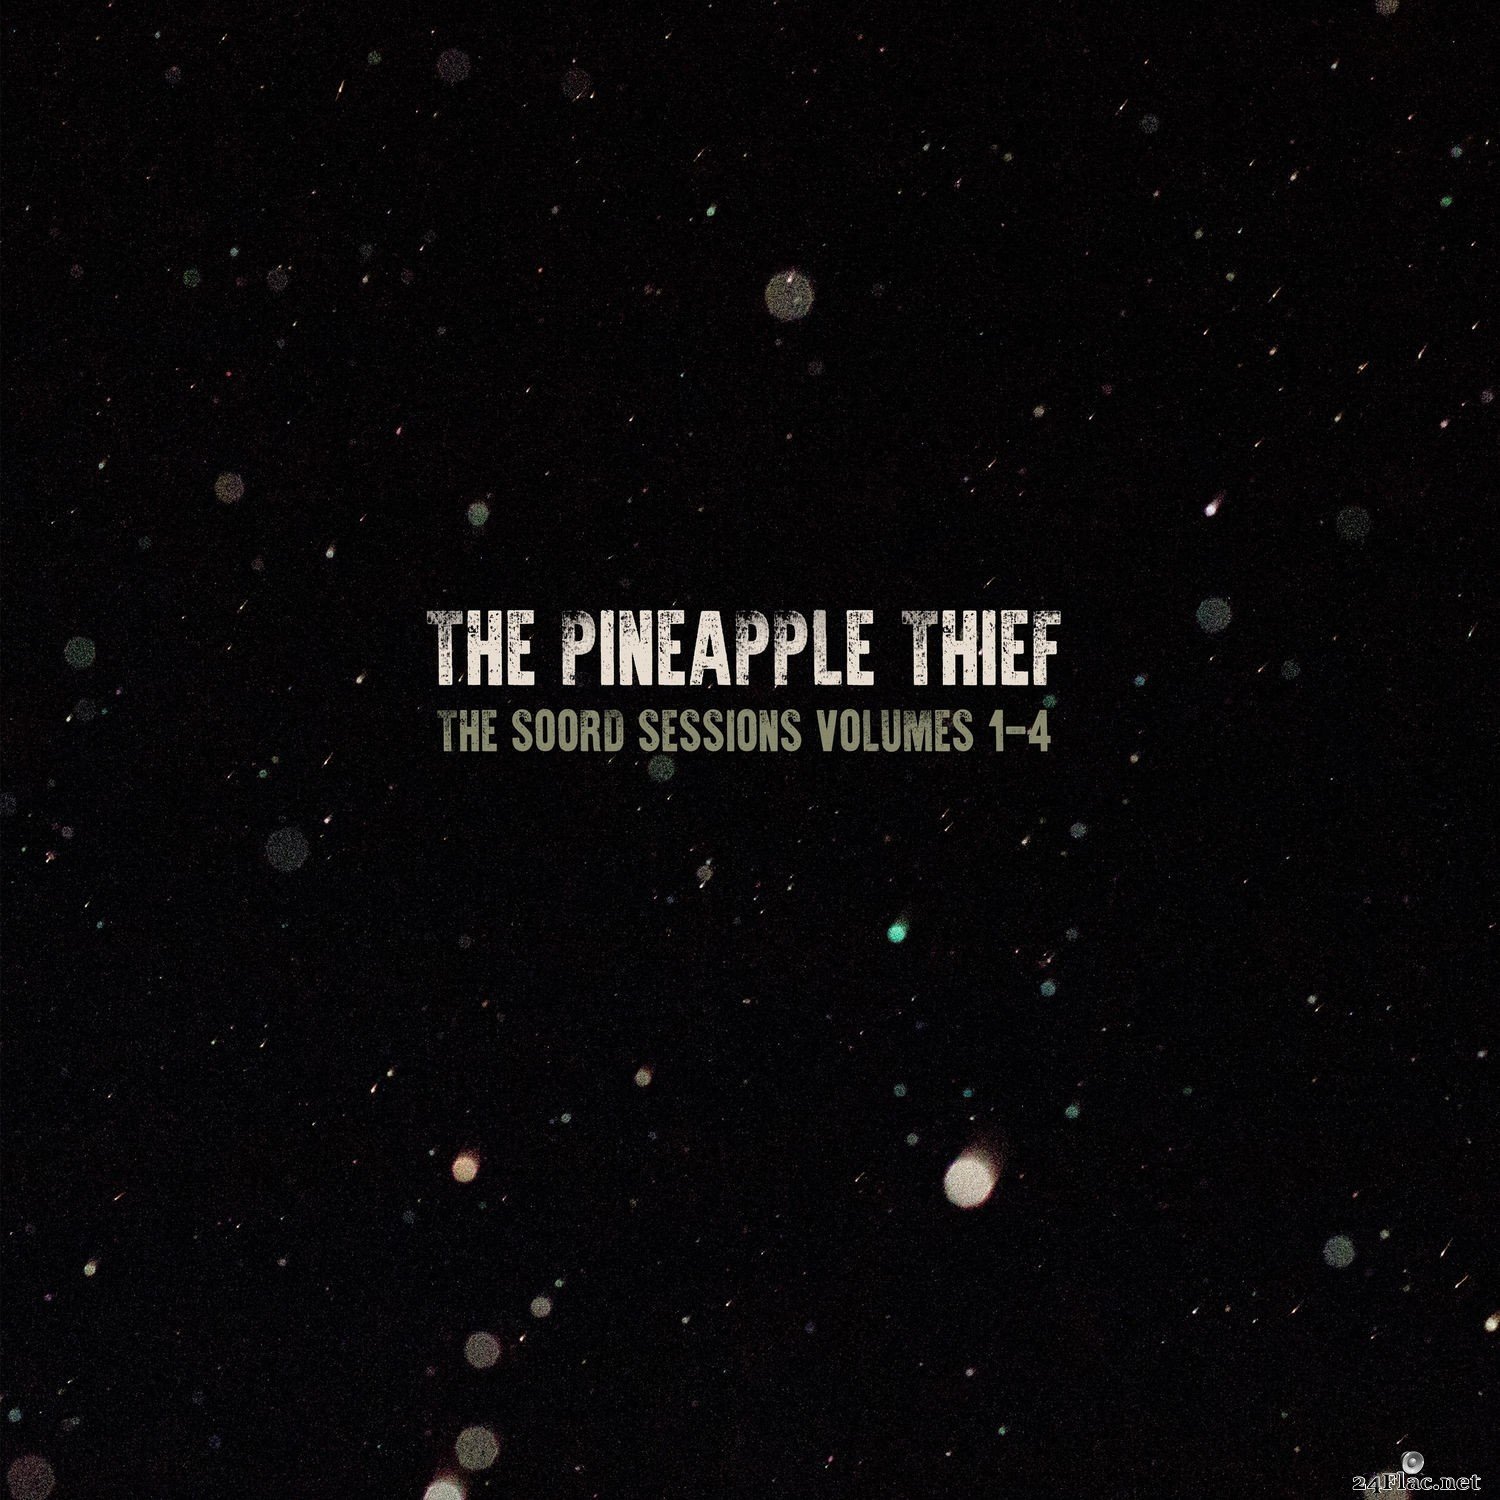 The Pineapple Thief - The Soord Sessions 1 - 4 (Sampler) (2021) Hi-Res